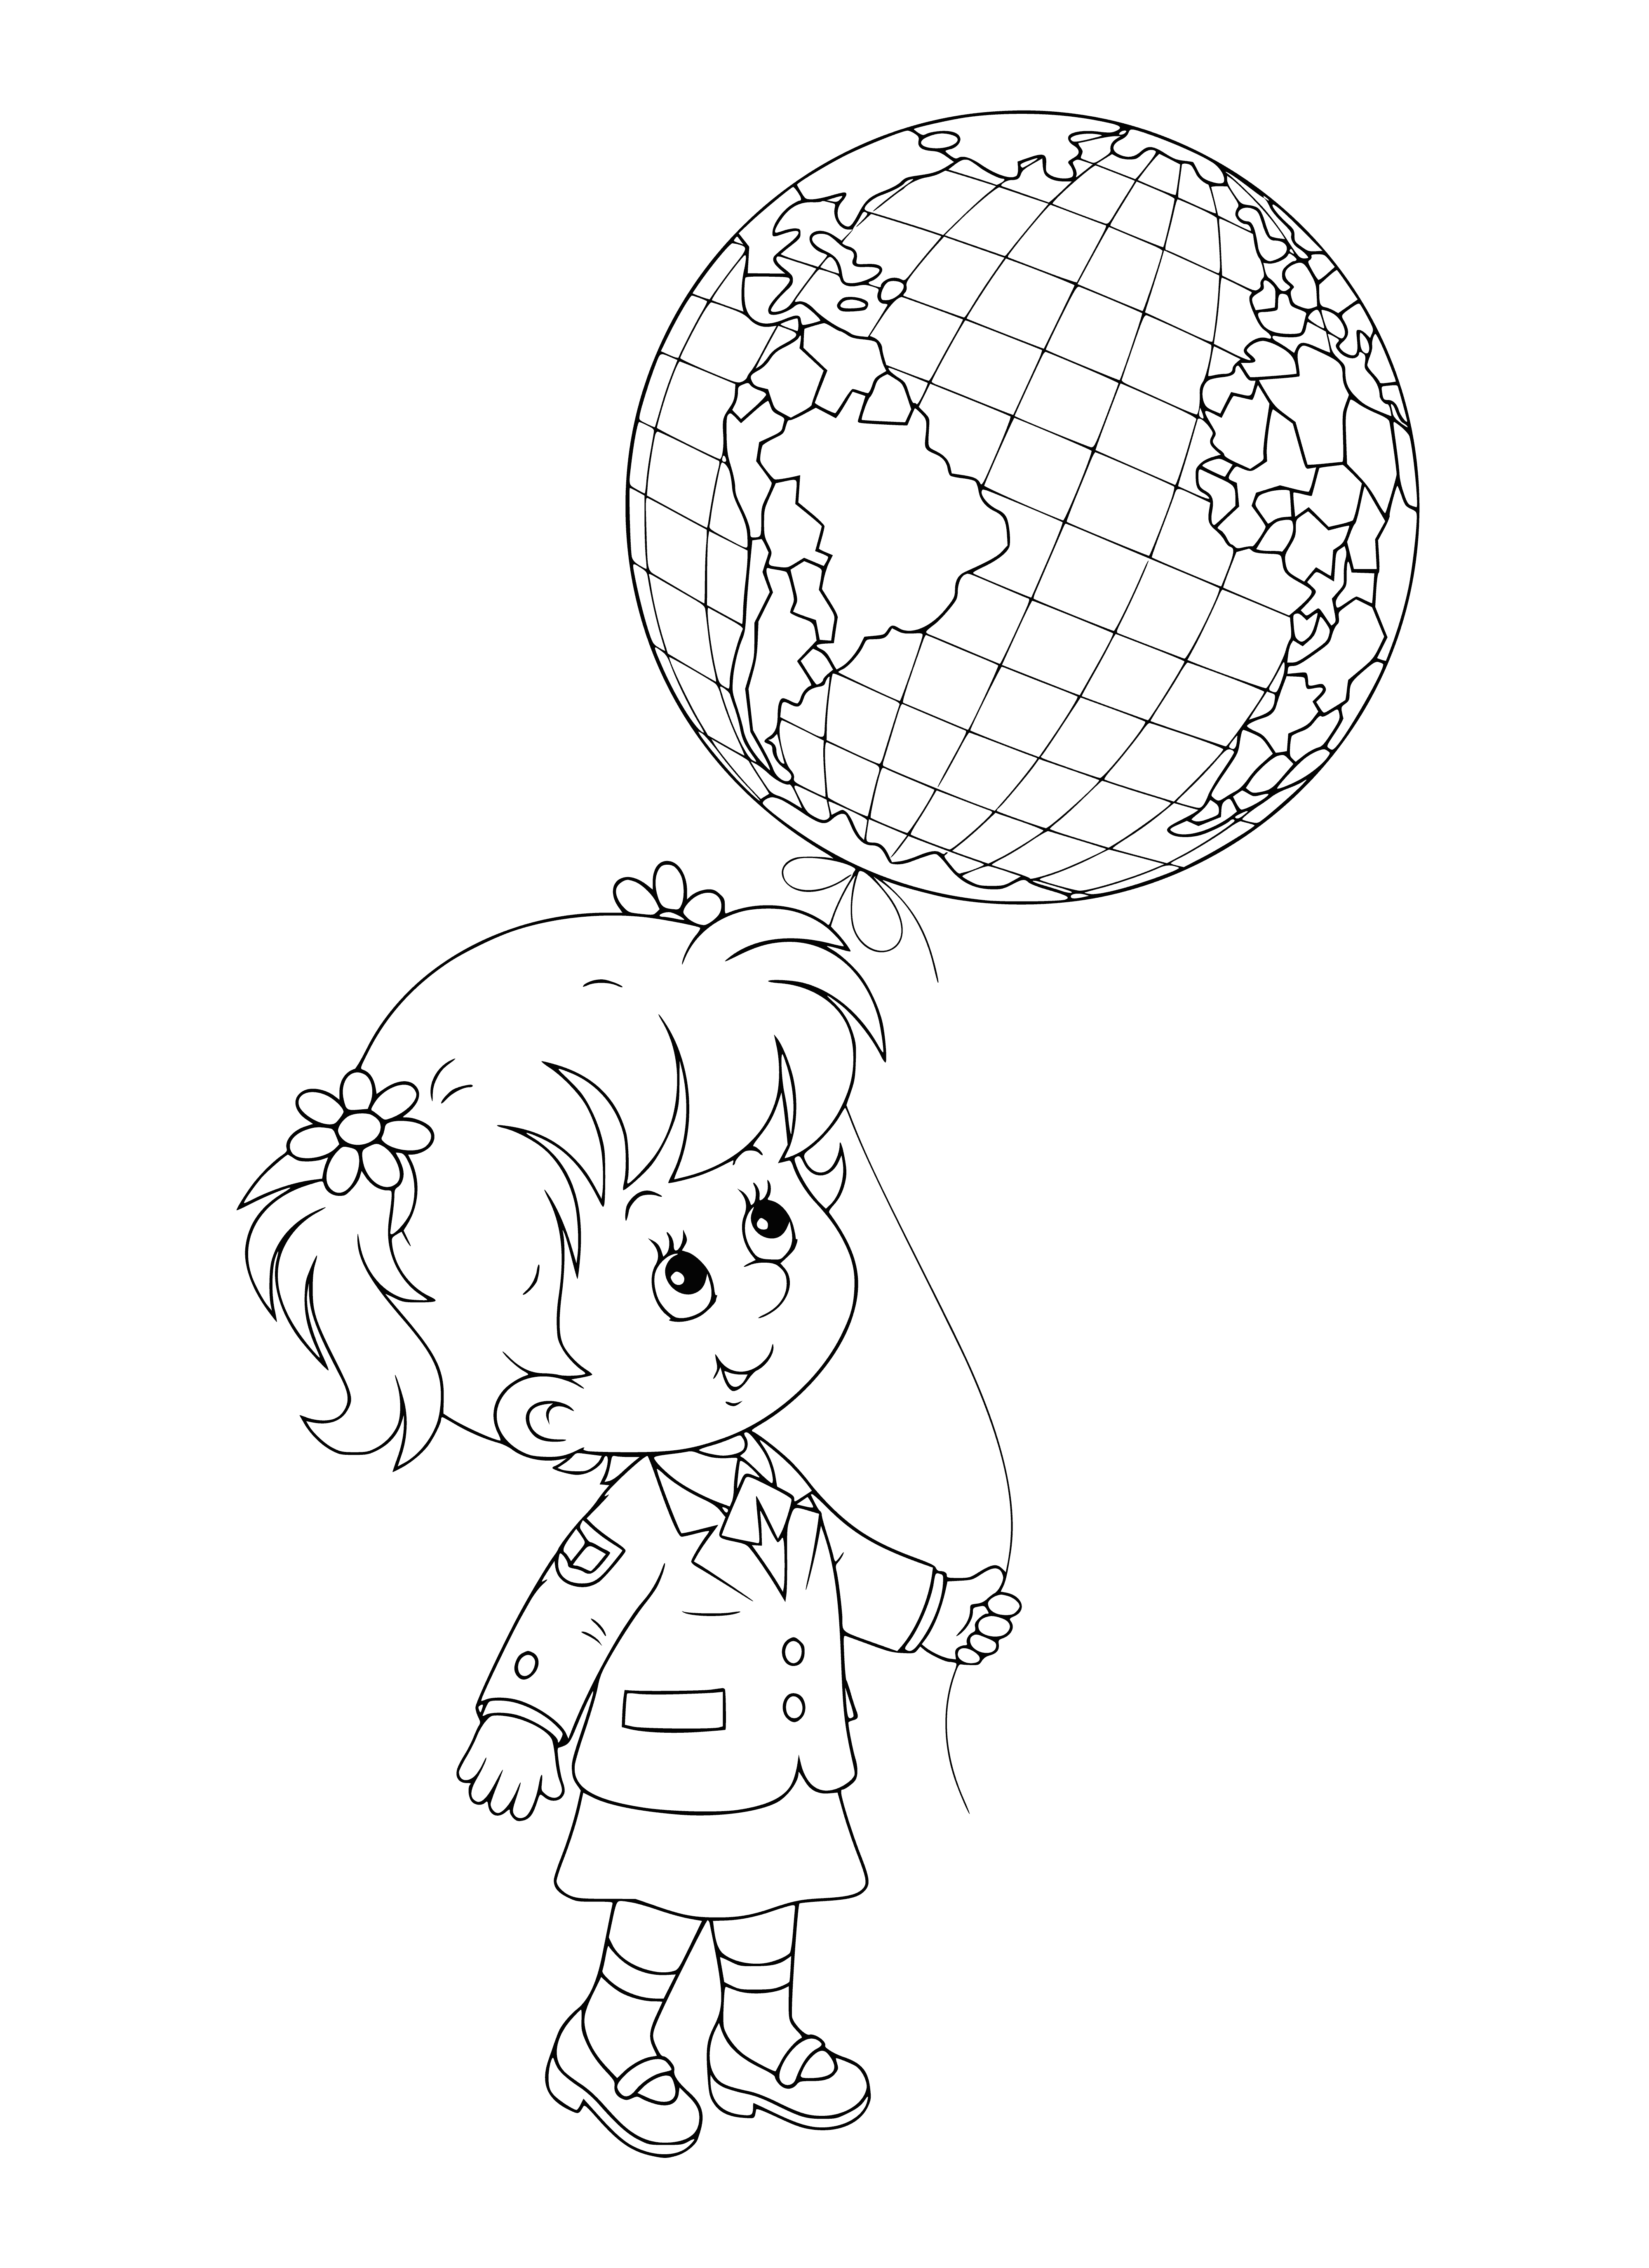 Knowledge Day coloring page